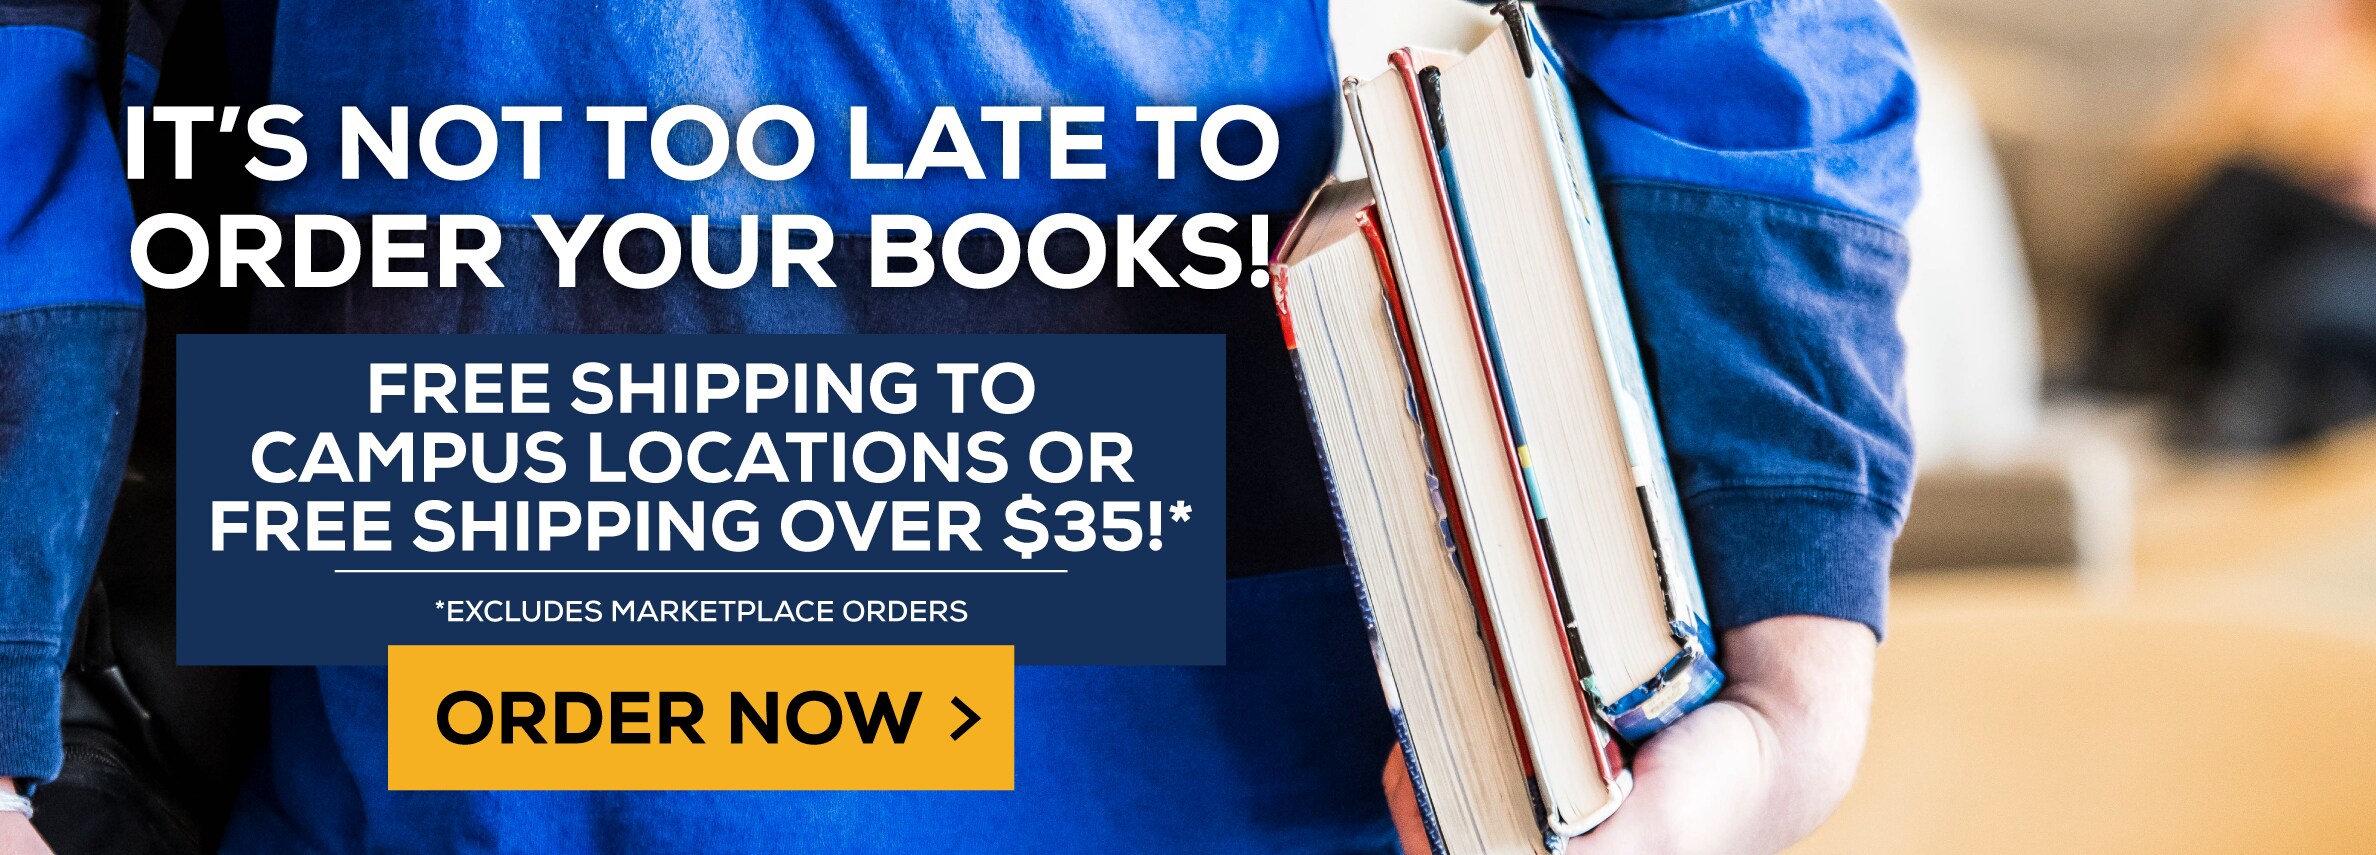 It's not too late to order your textbooks! Free shipping to campus locations or on all orders over $35.* Excludes Marketplace Purchases. Order now